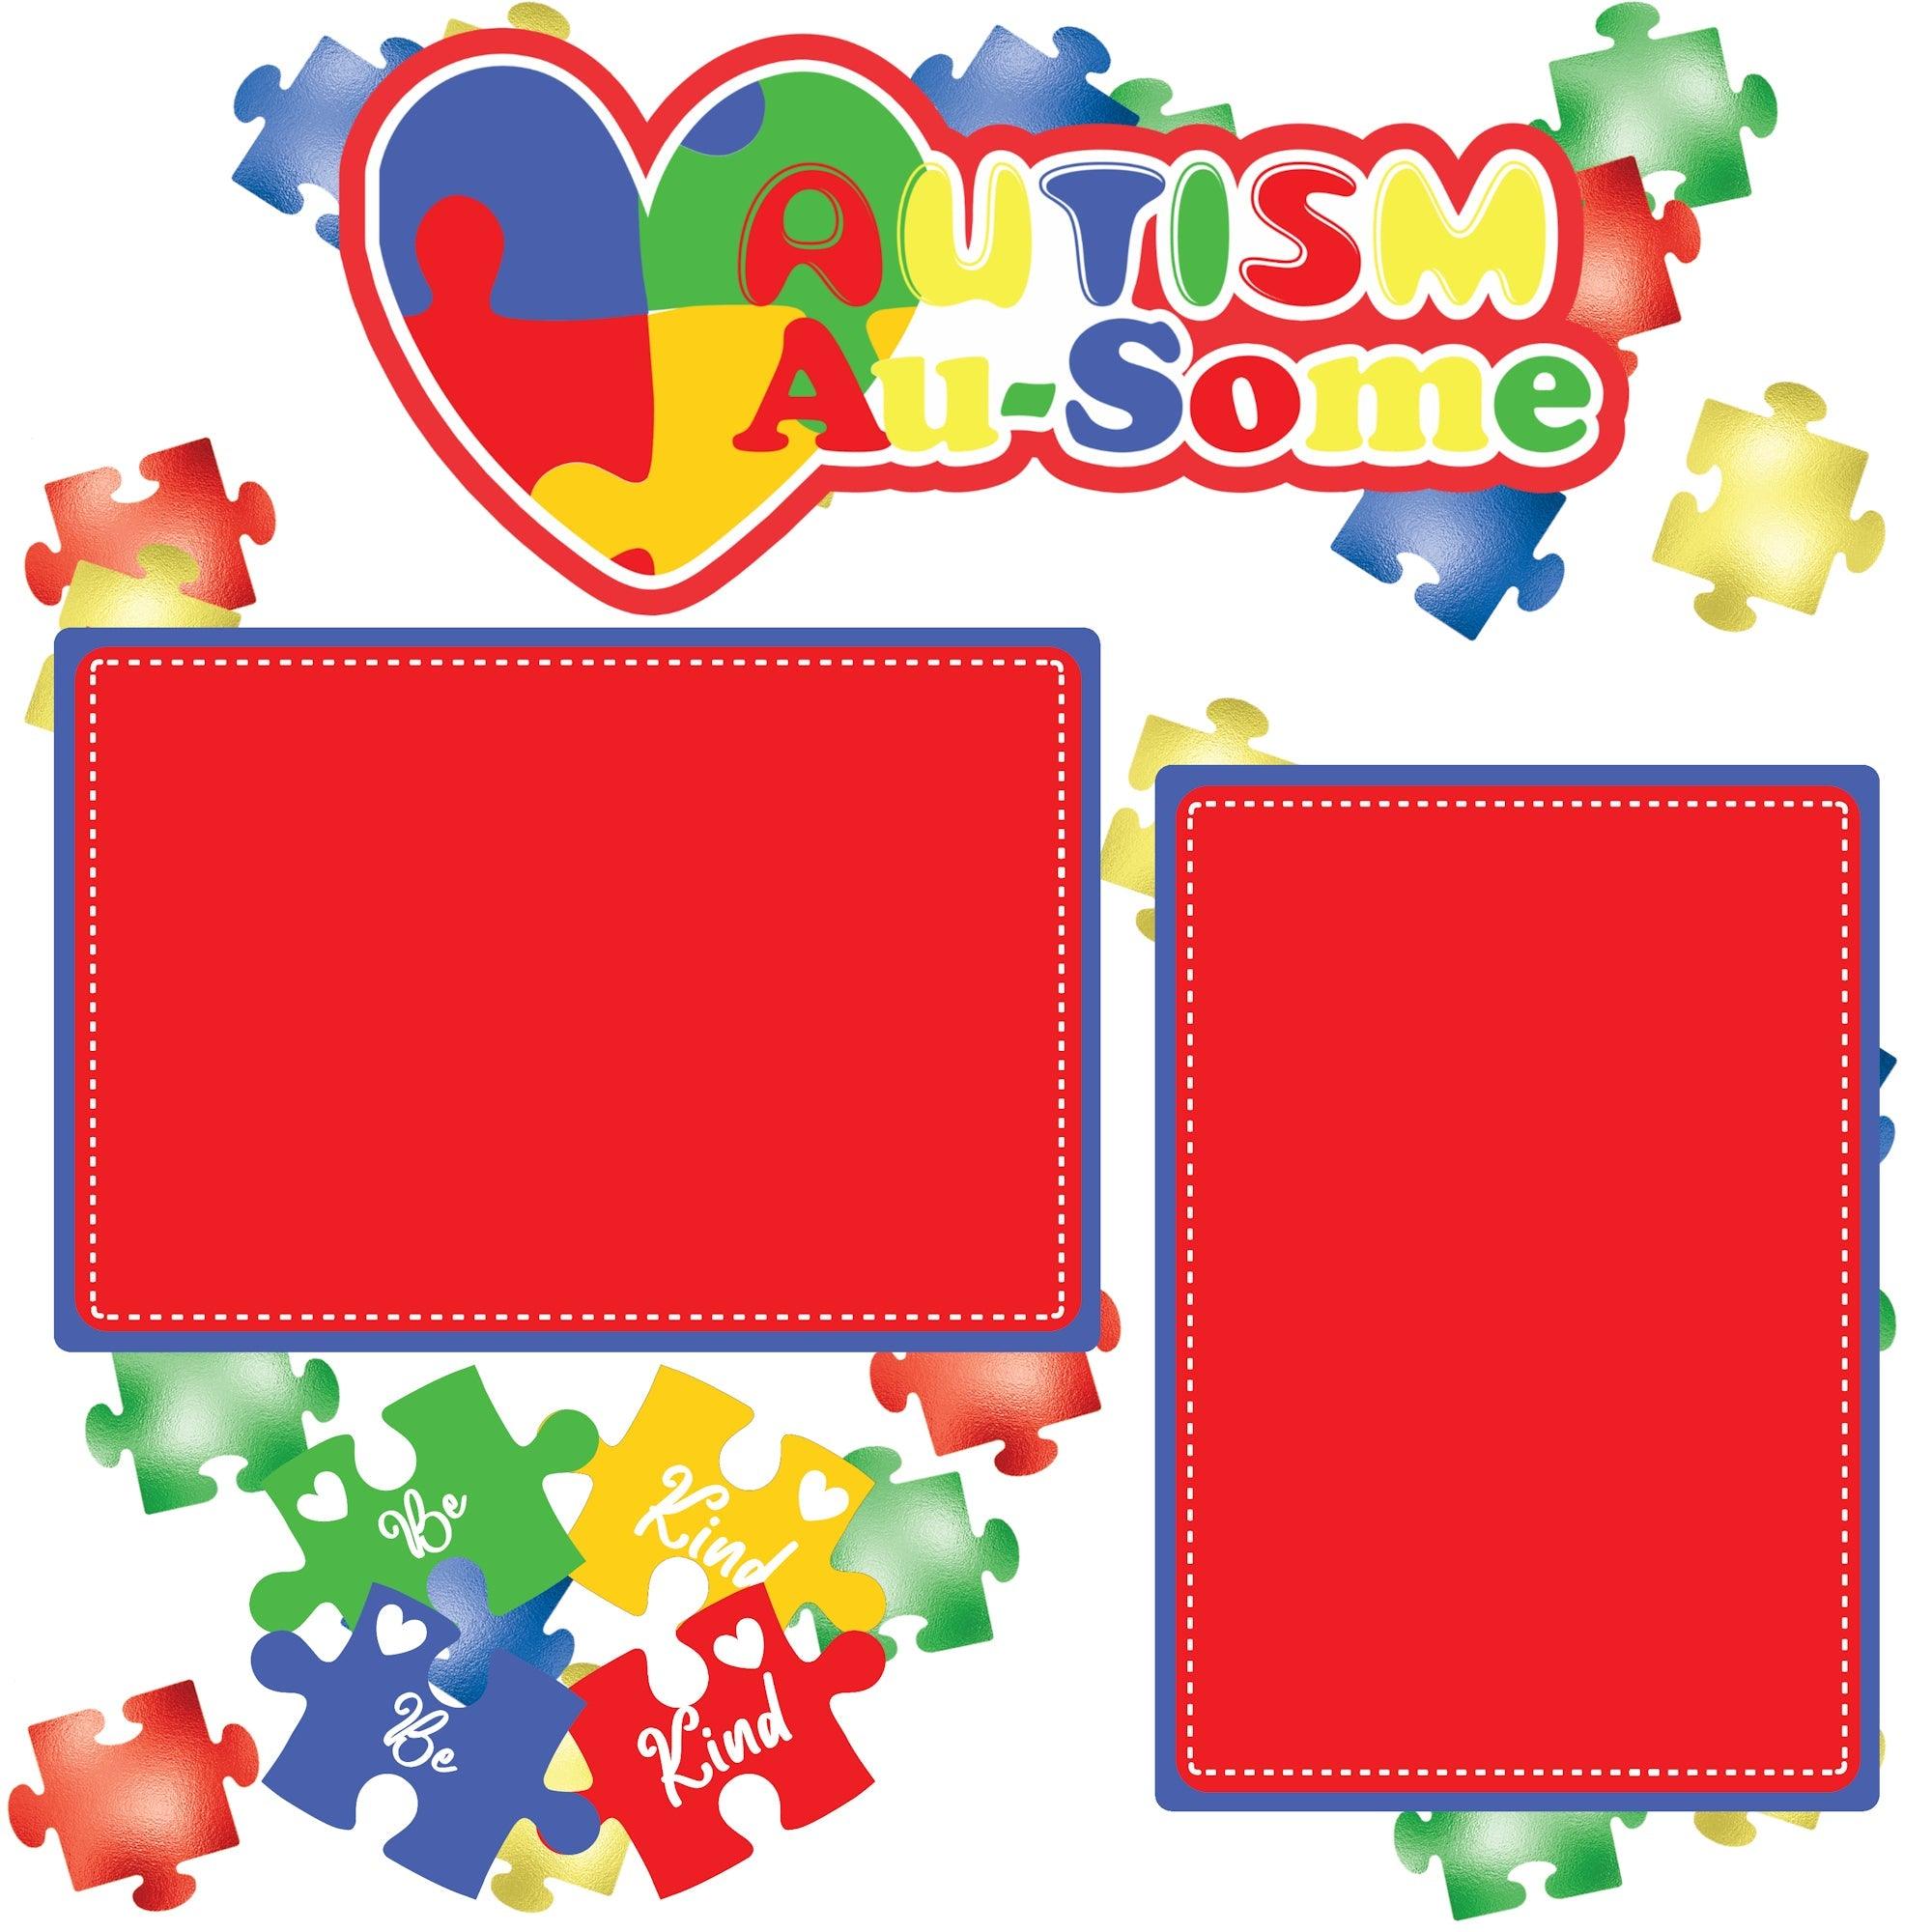 Autism Au-Some (2) - 12 x 12 Premade, Printed Scrapbook Pages by SSC Designs - Scrapbook Supply Companies